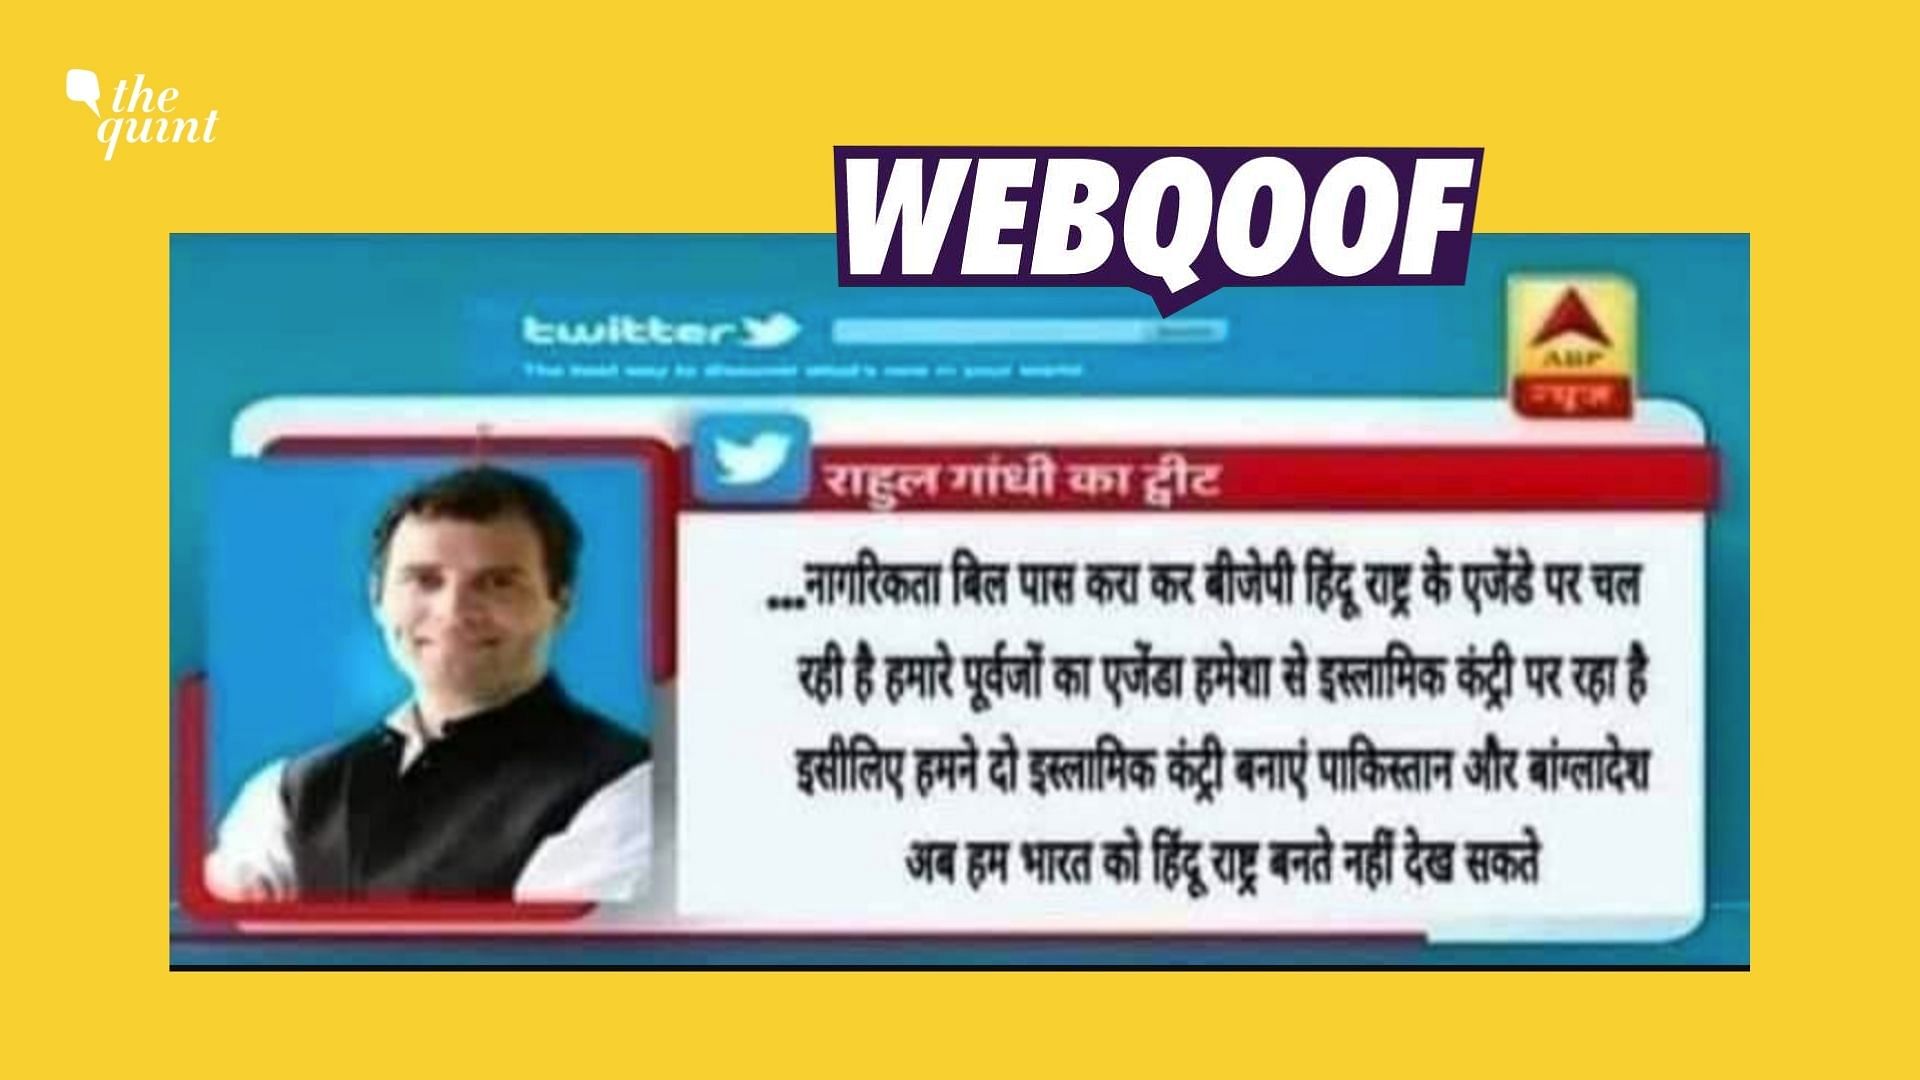 <div class="paragraphs"><p>A morphed screenshot of an ABP News Hindi's bulletin was used to falsely claim that Rahul Gandhi tweeted he couldn't see India becoming a 'Hindu nation.'</p></div><div class="paragraphs"><p></p><p><br></p></div>